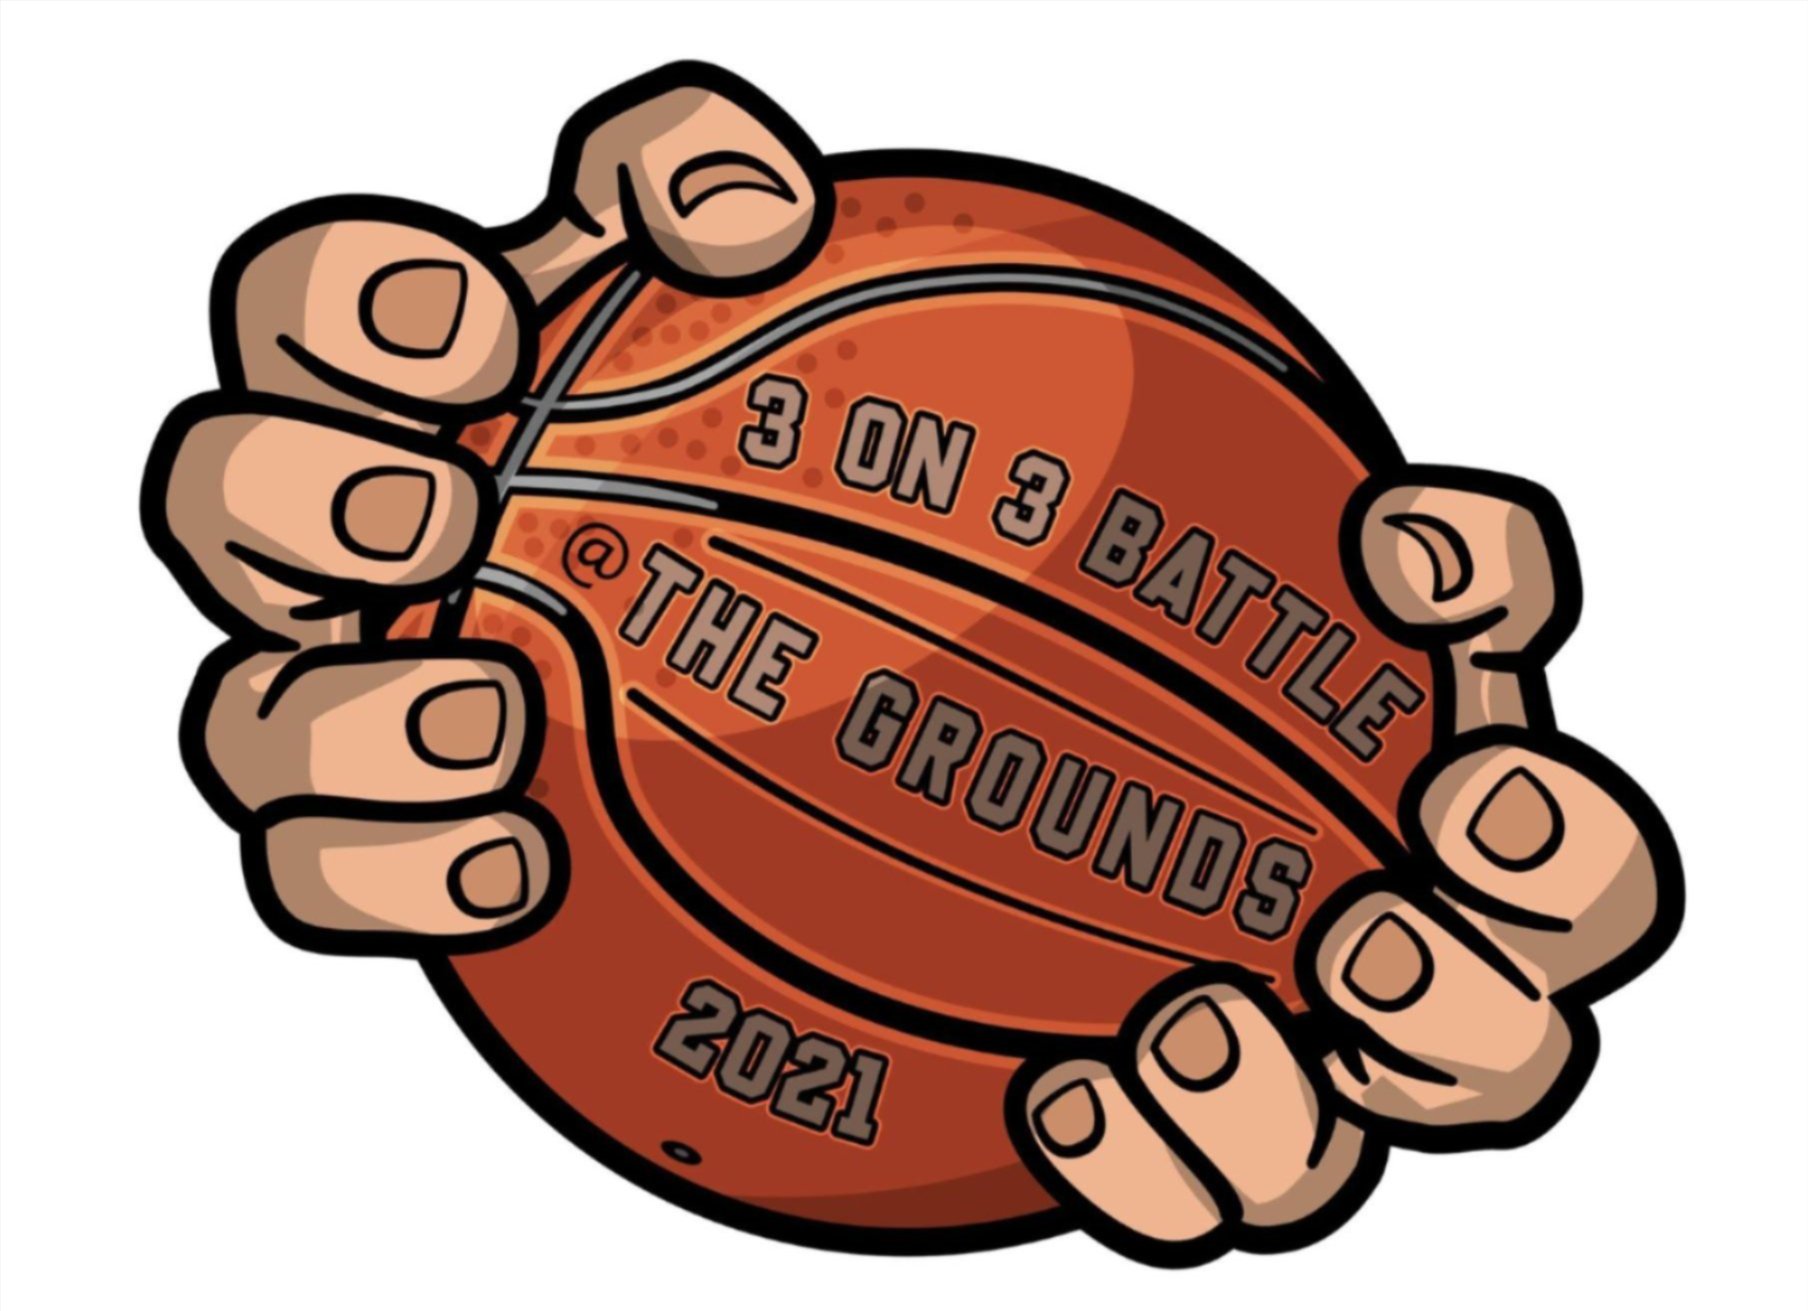 3 on 3 Battle @the Grounds